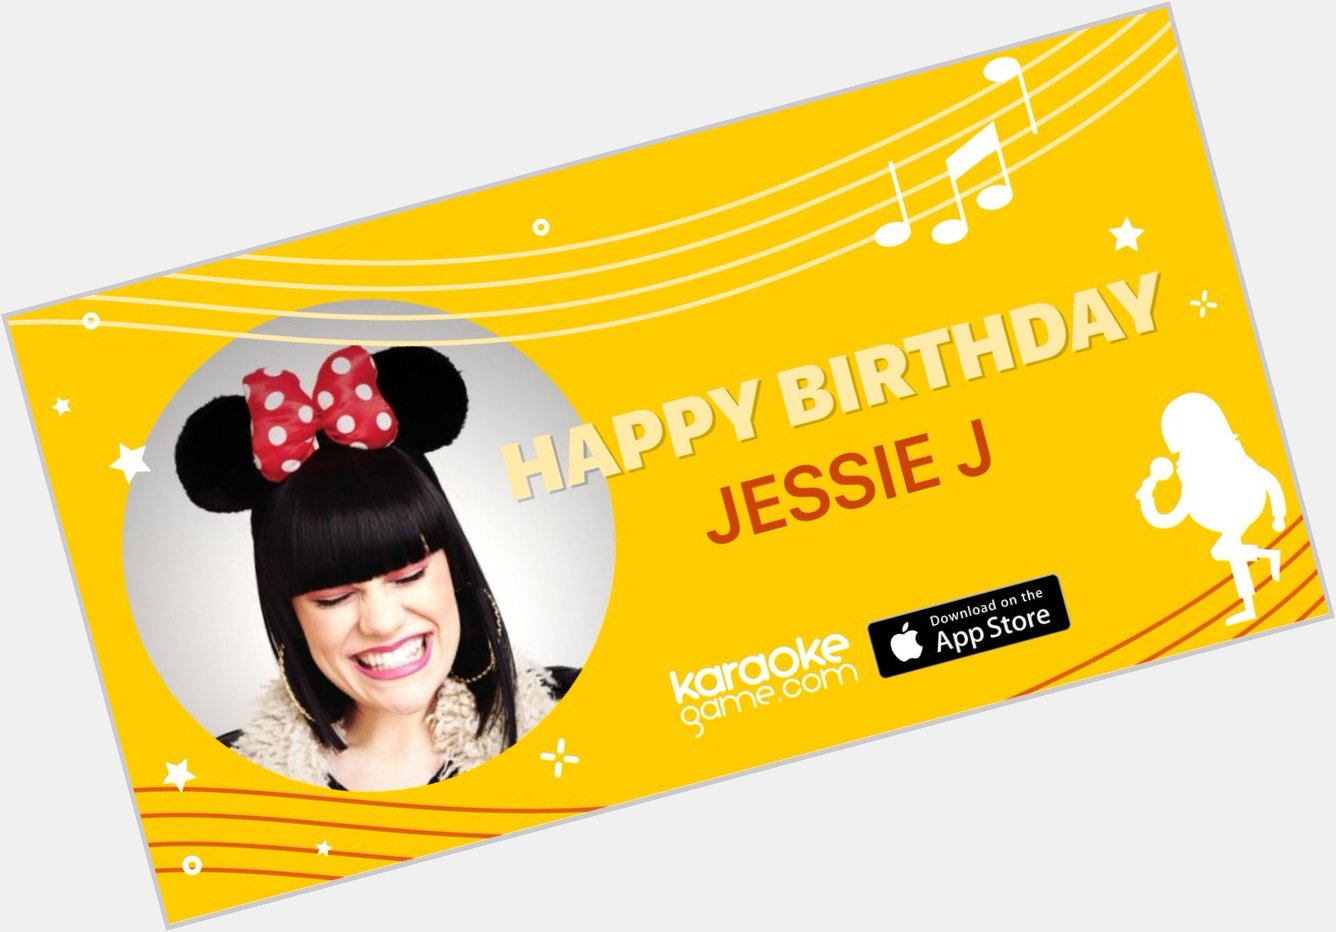 It\s time to make the world dance with  Wish her Happy Birthday by singing:  